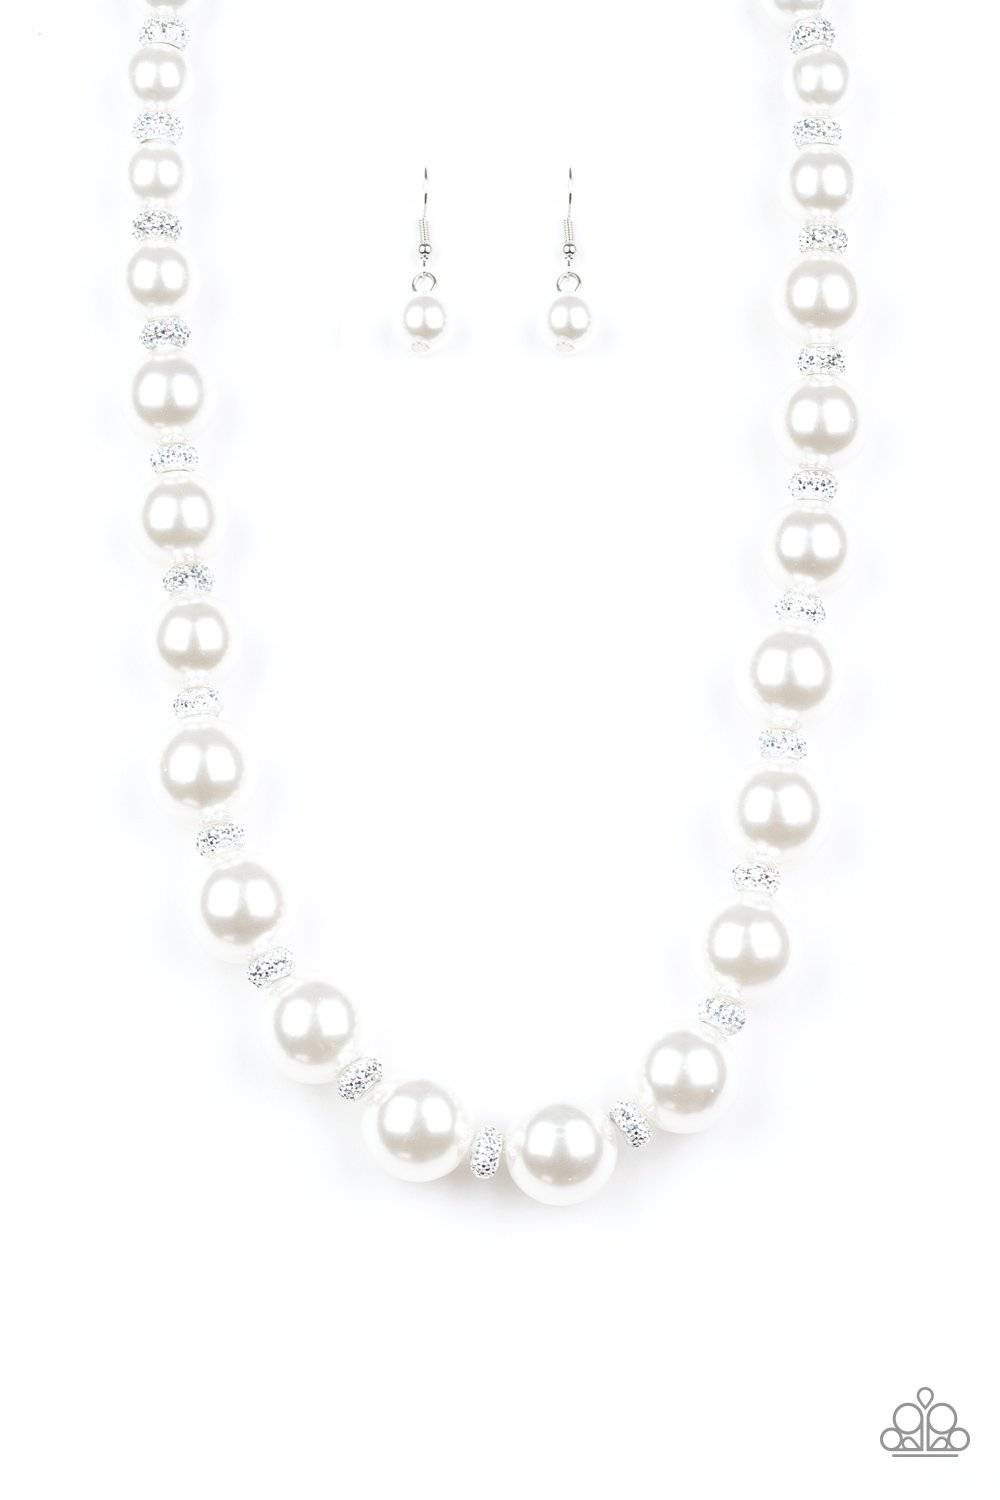 Uptown Heiress - White Pearl Necklace - Paparazzi Accessories - GlaMarous Titi Jewels